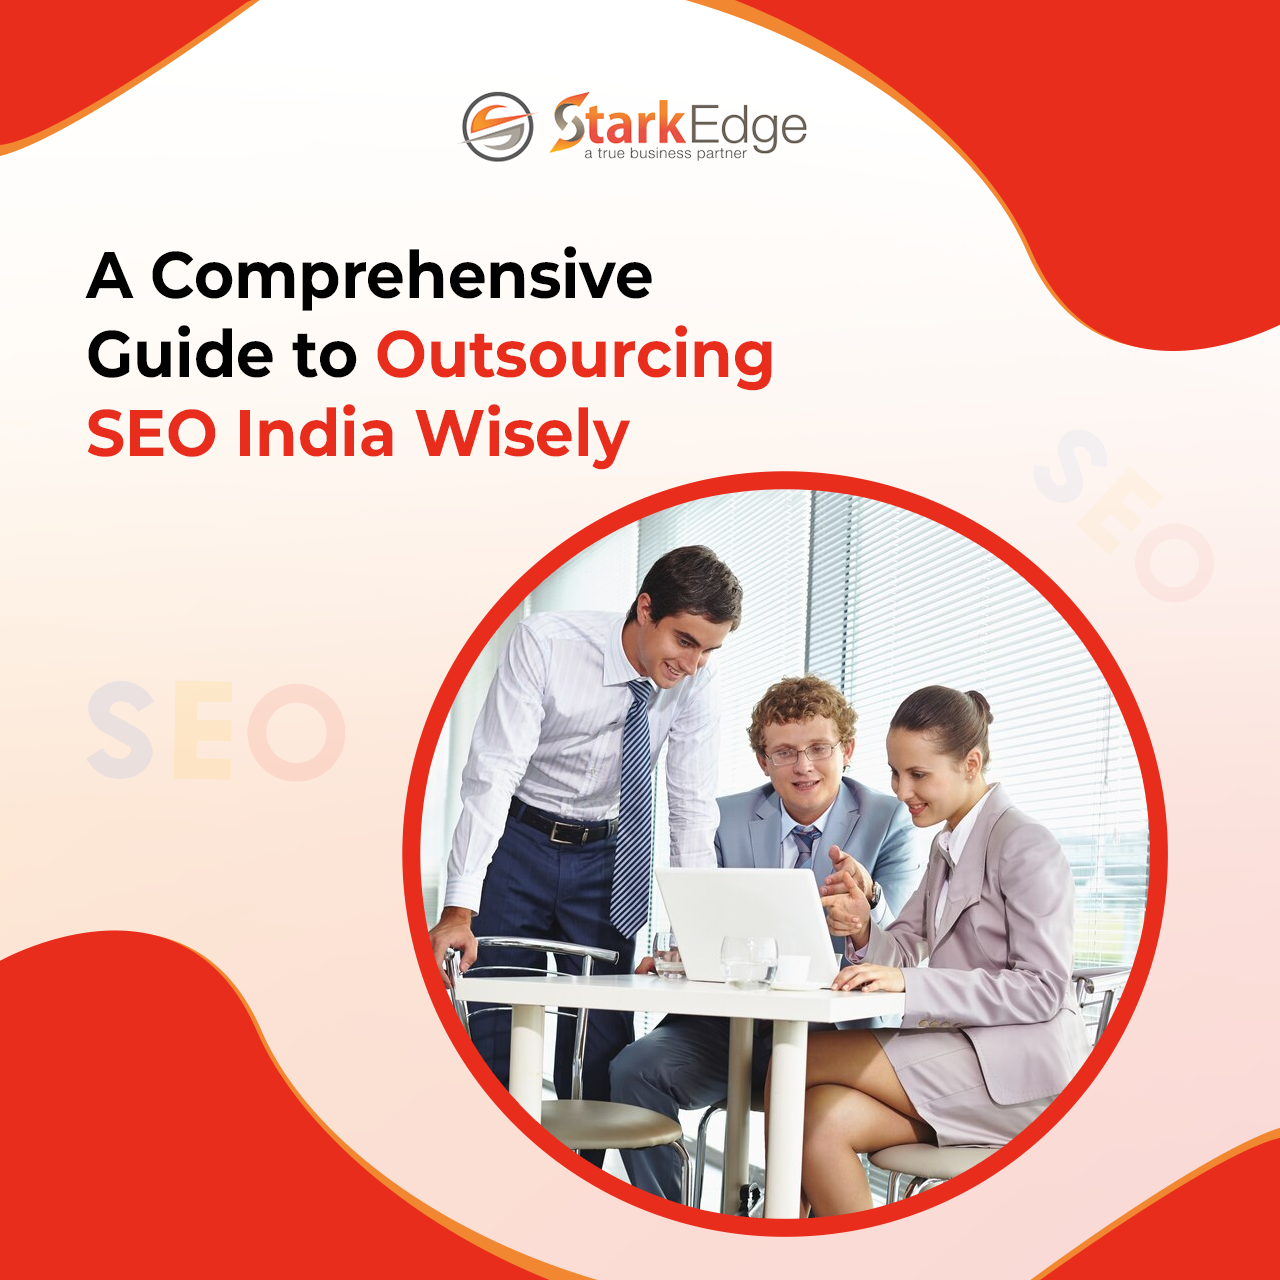 A Comprehensive Guide To Outsourcing SEO India Wisely